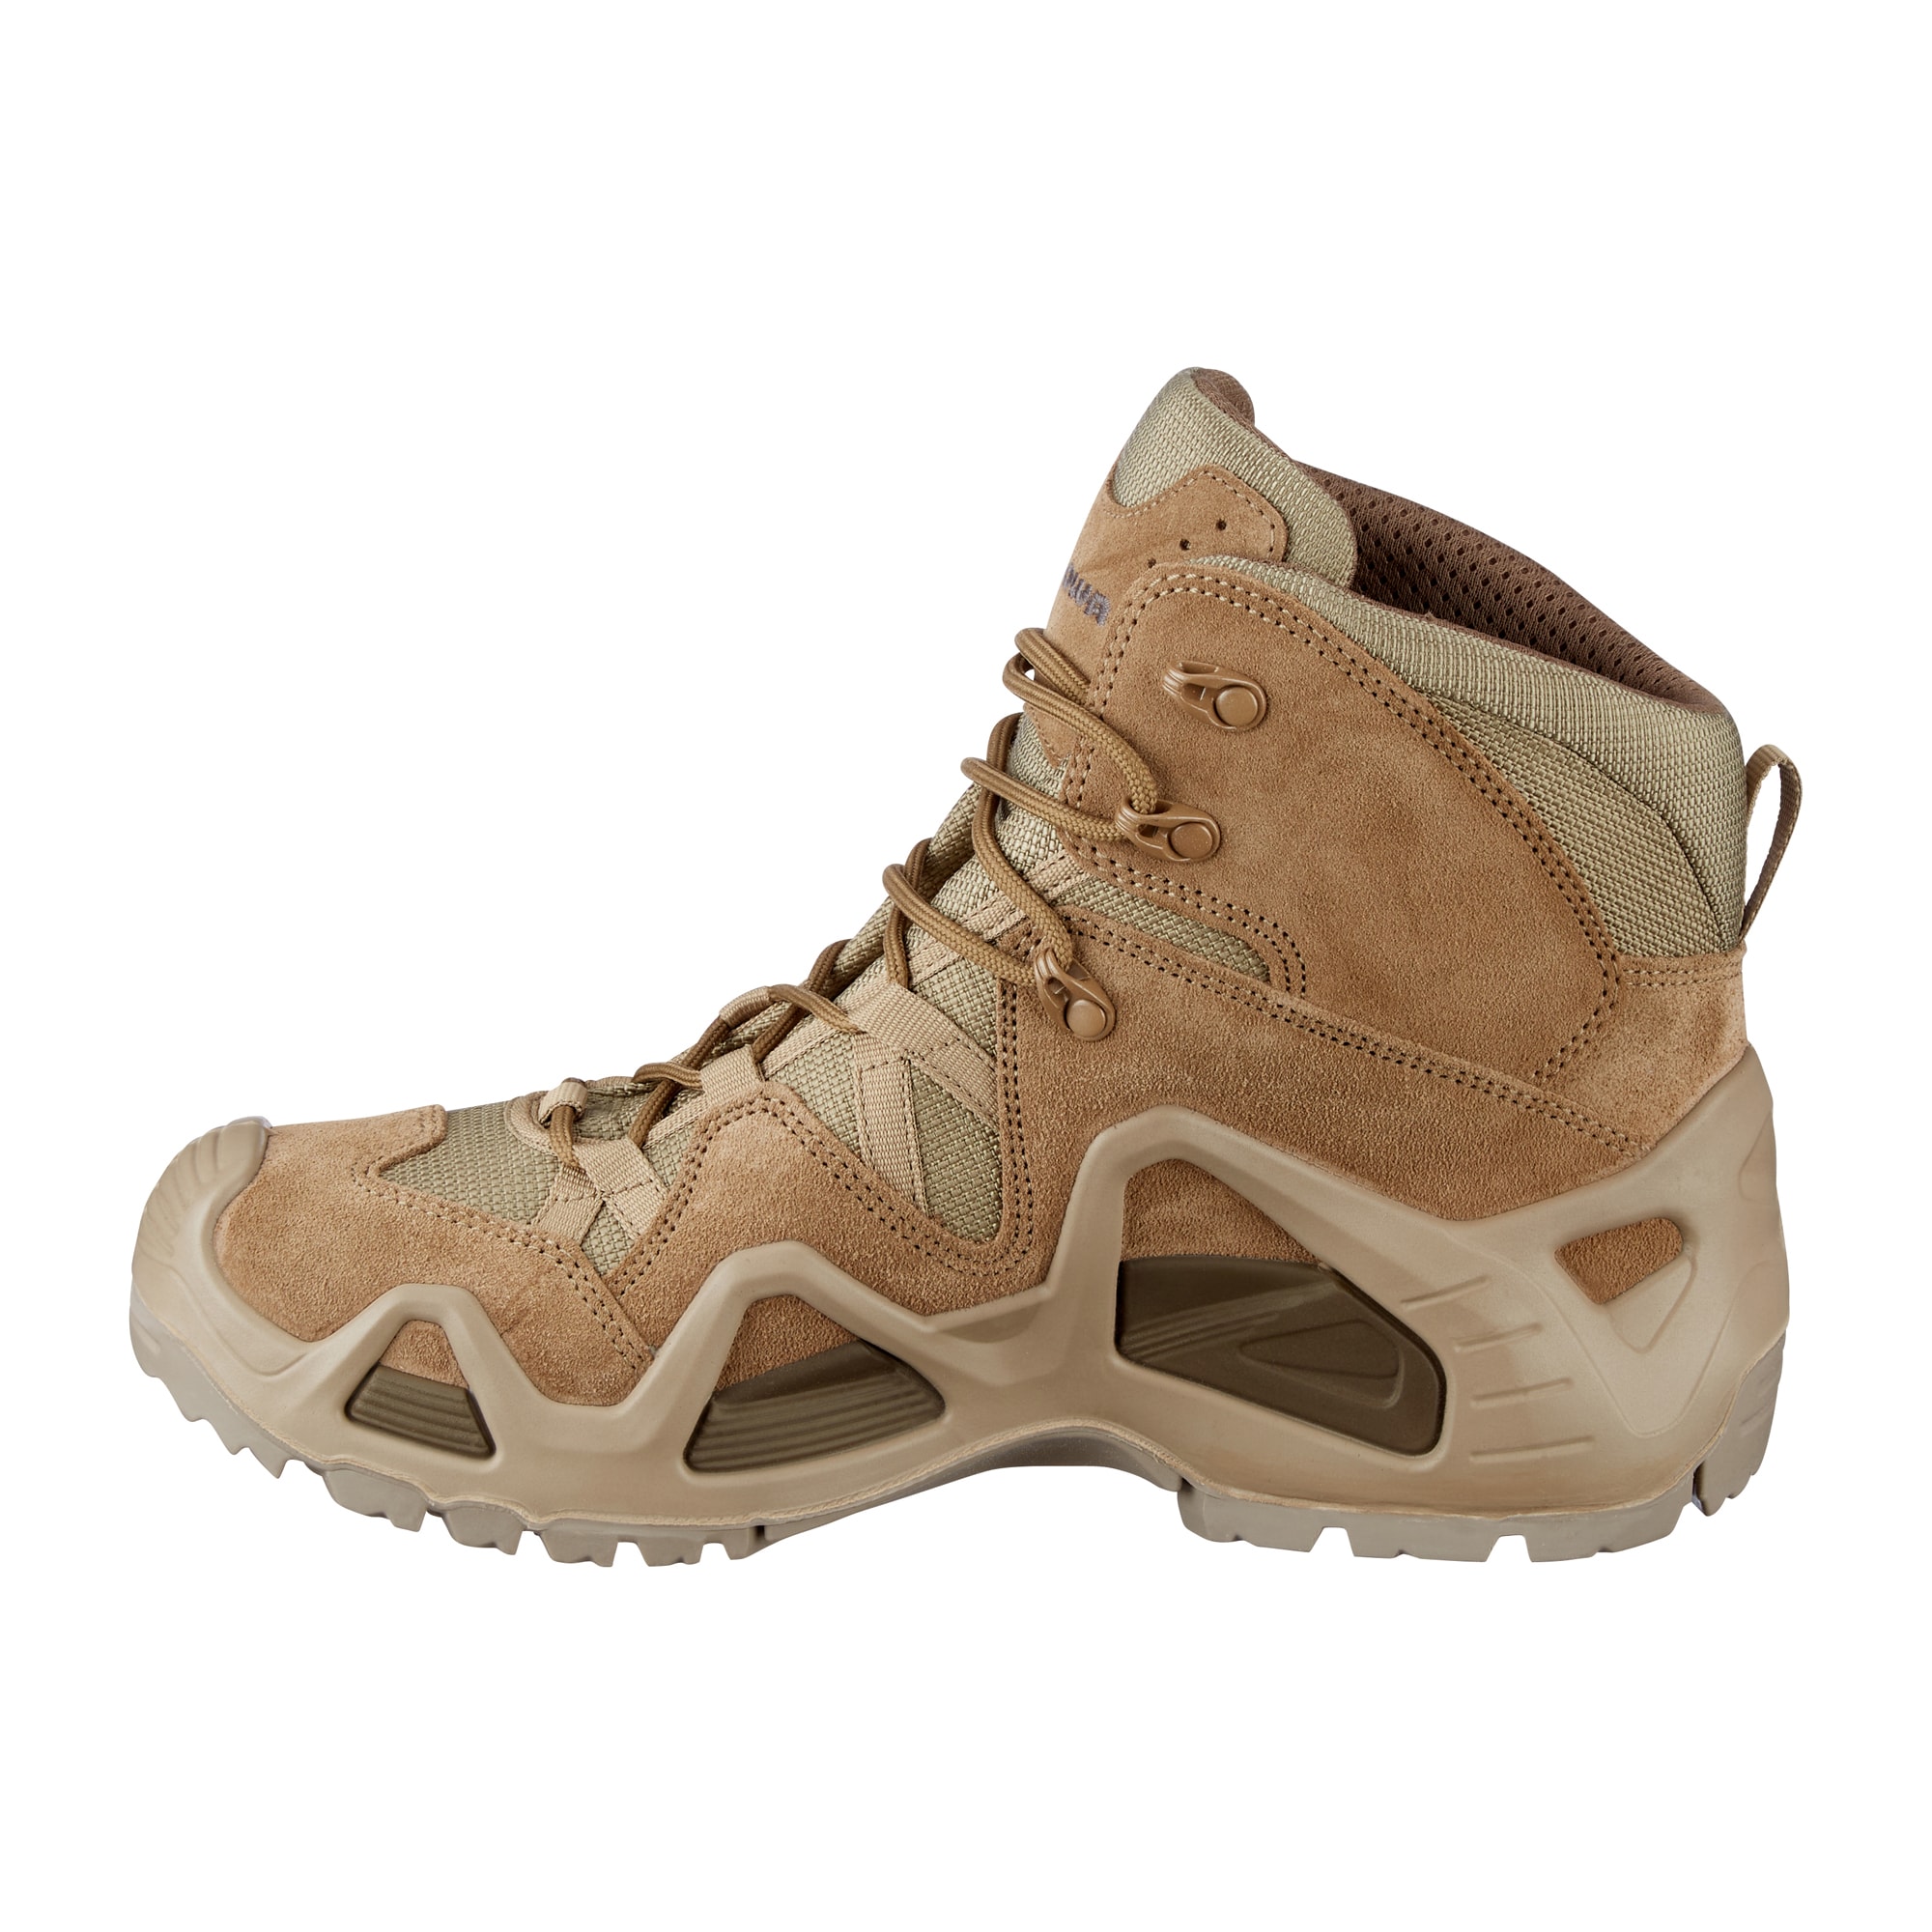 LOWA Boots Zephyr GTX Mid TF coyote